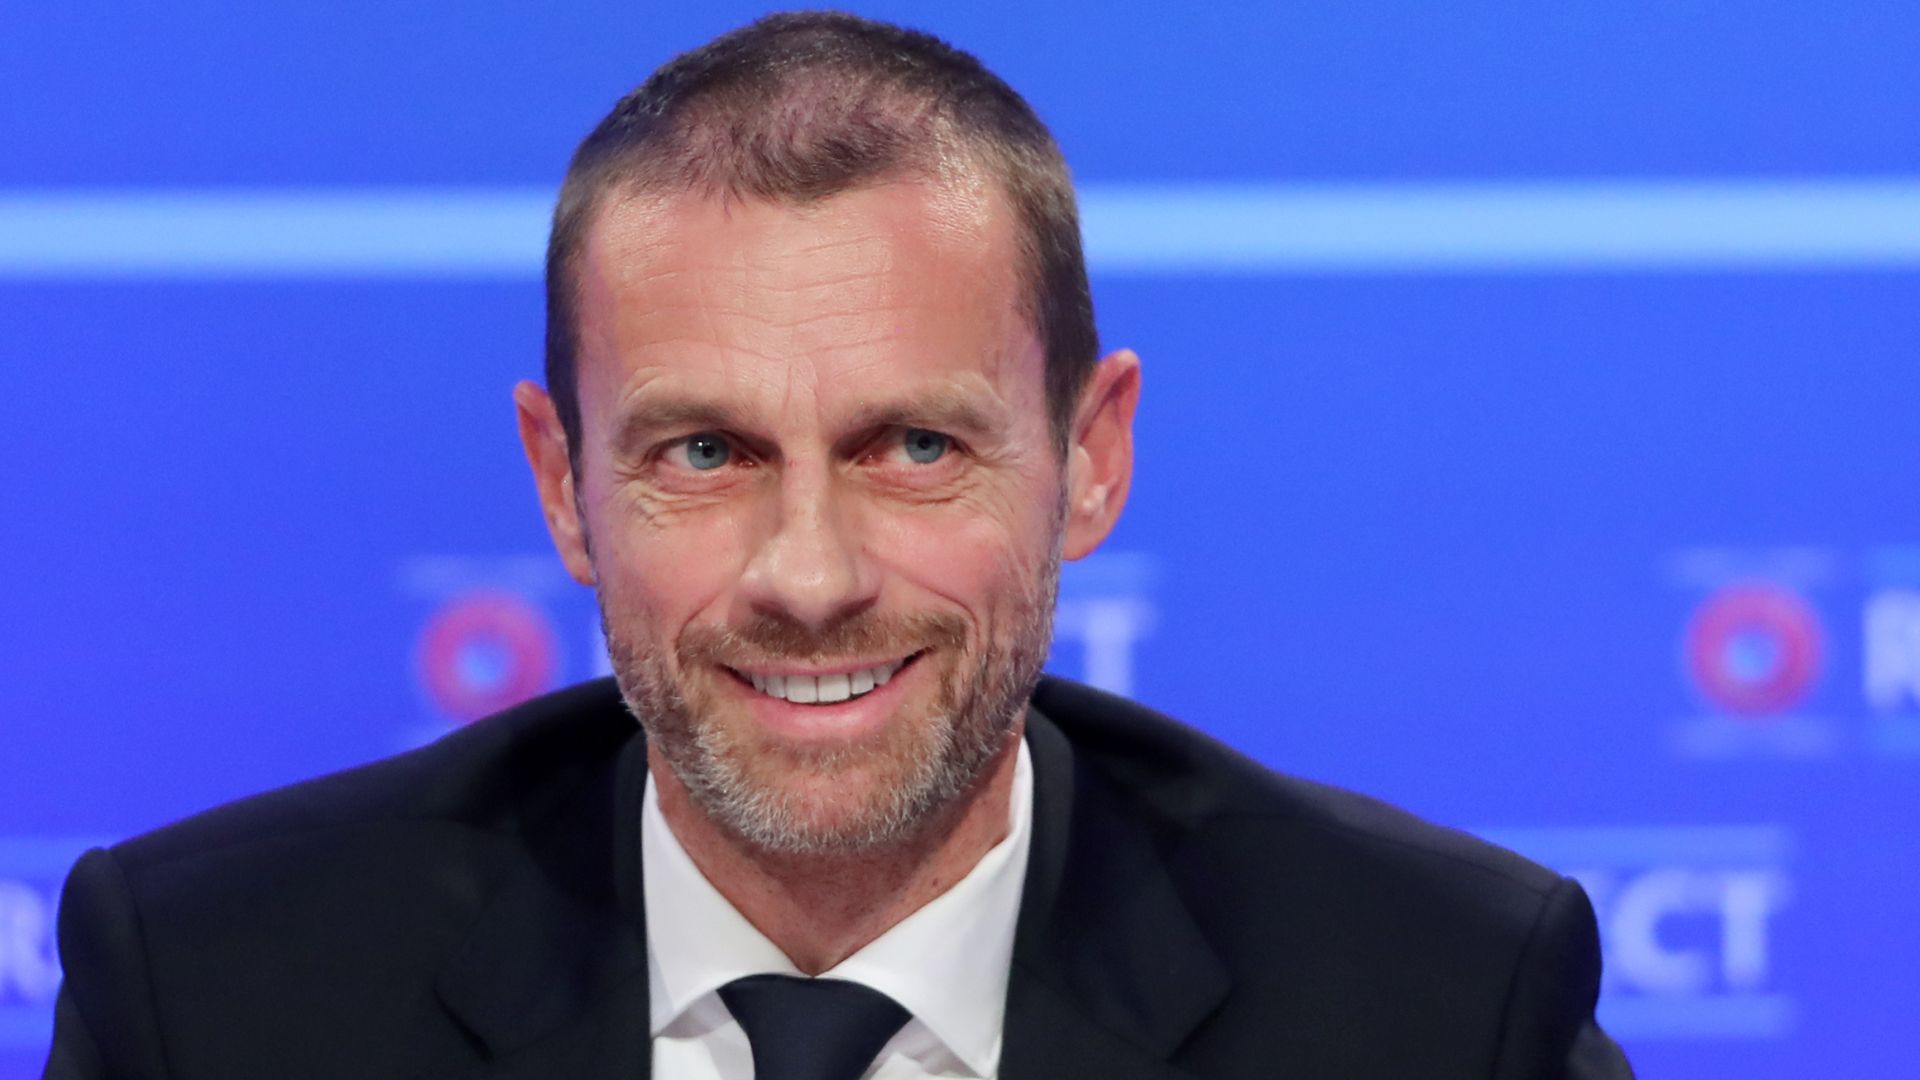 UEFA set to overhaul FFP rules later this year